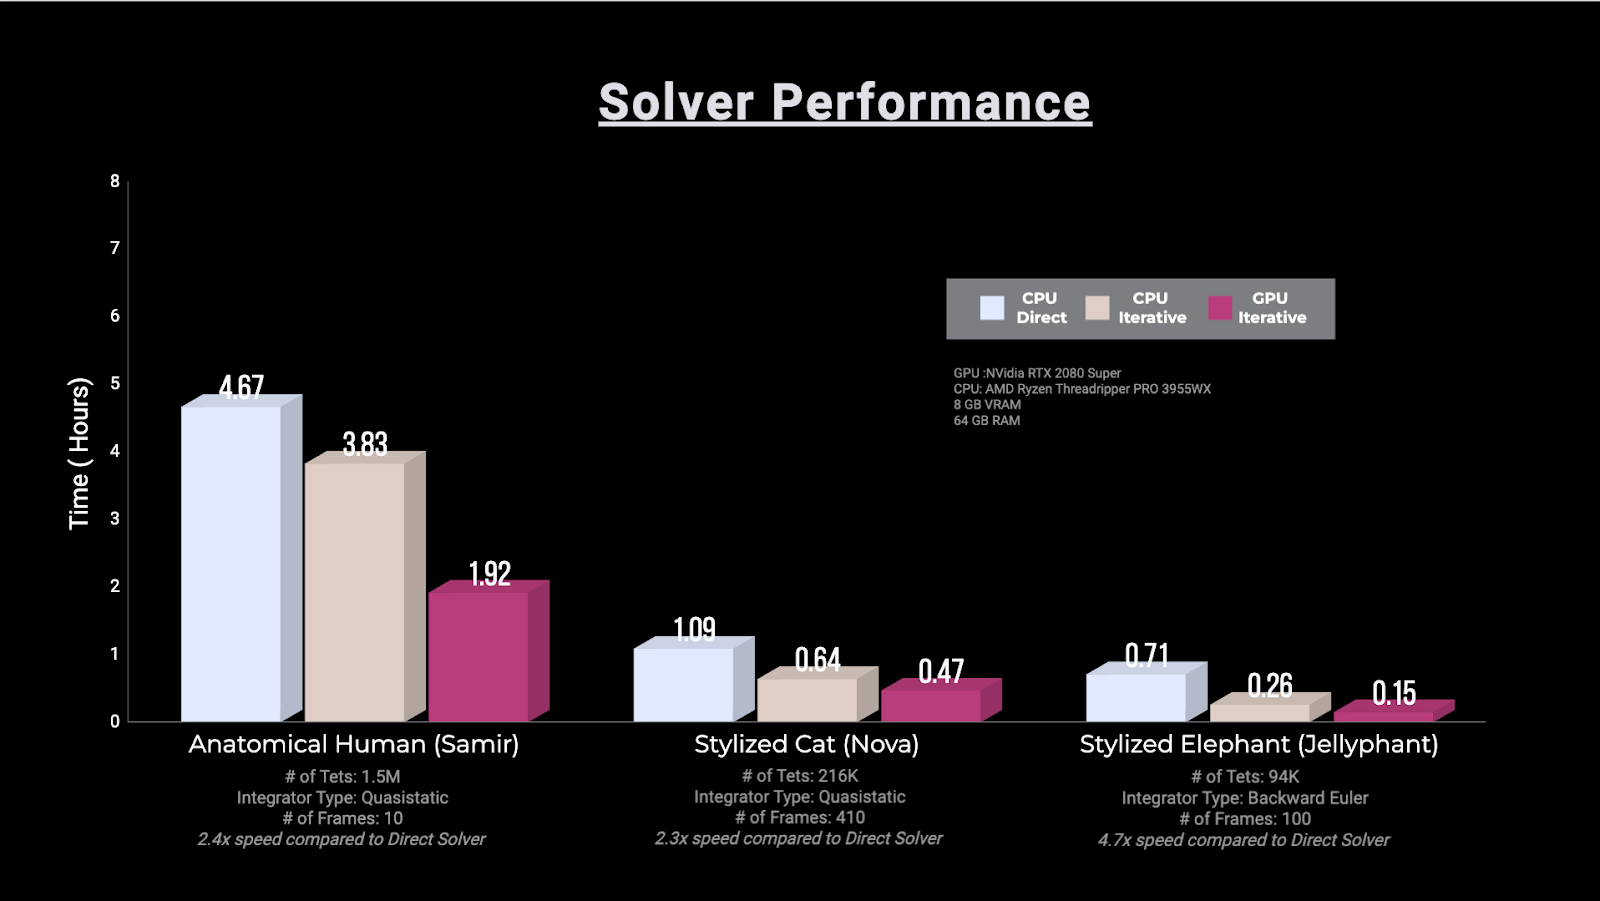 Bar graph of the performance of the three available solvers (CPU Direct, CPU Iterative, and the new GPU Iterative) in Ziva VFX 2.2. The leftmost cluster of data is for a full anatomical human, for which the GPU provides a 2.4x speedup. In the middle is a cartoon cat, and on the right a single-tissue stylized elephant. The speedups provided for these are 2.3x and 4.7x, respectively.